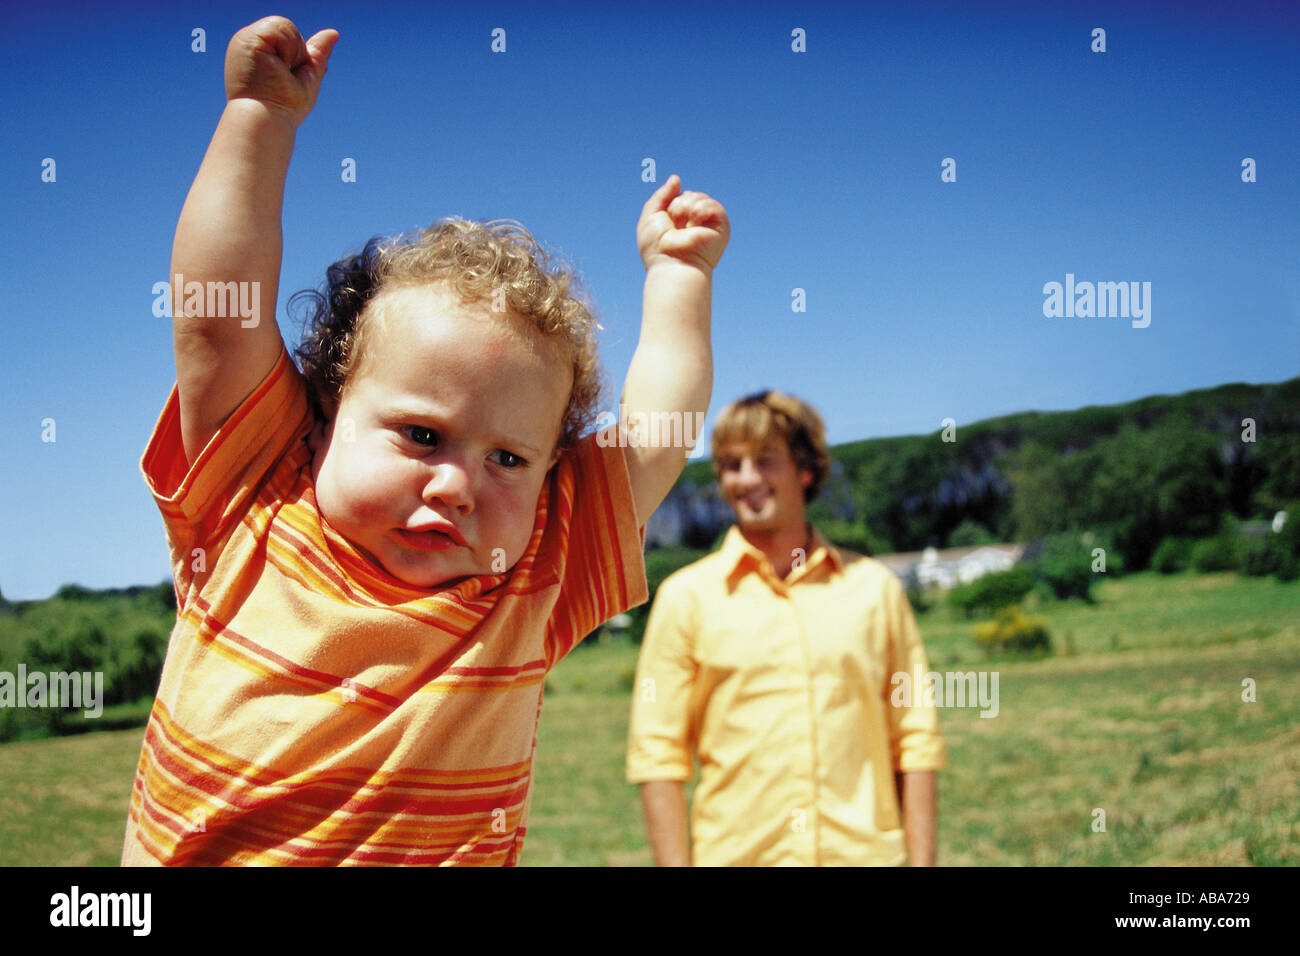 Toddler with arms in the air Stock Photo